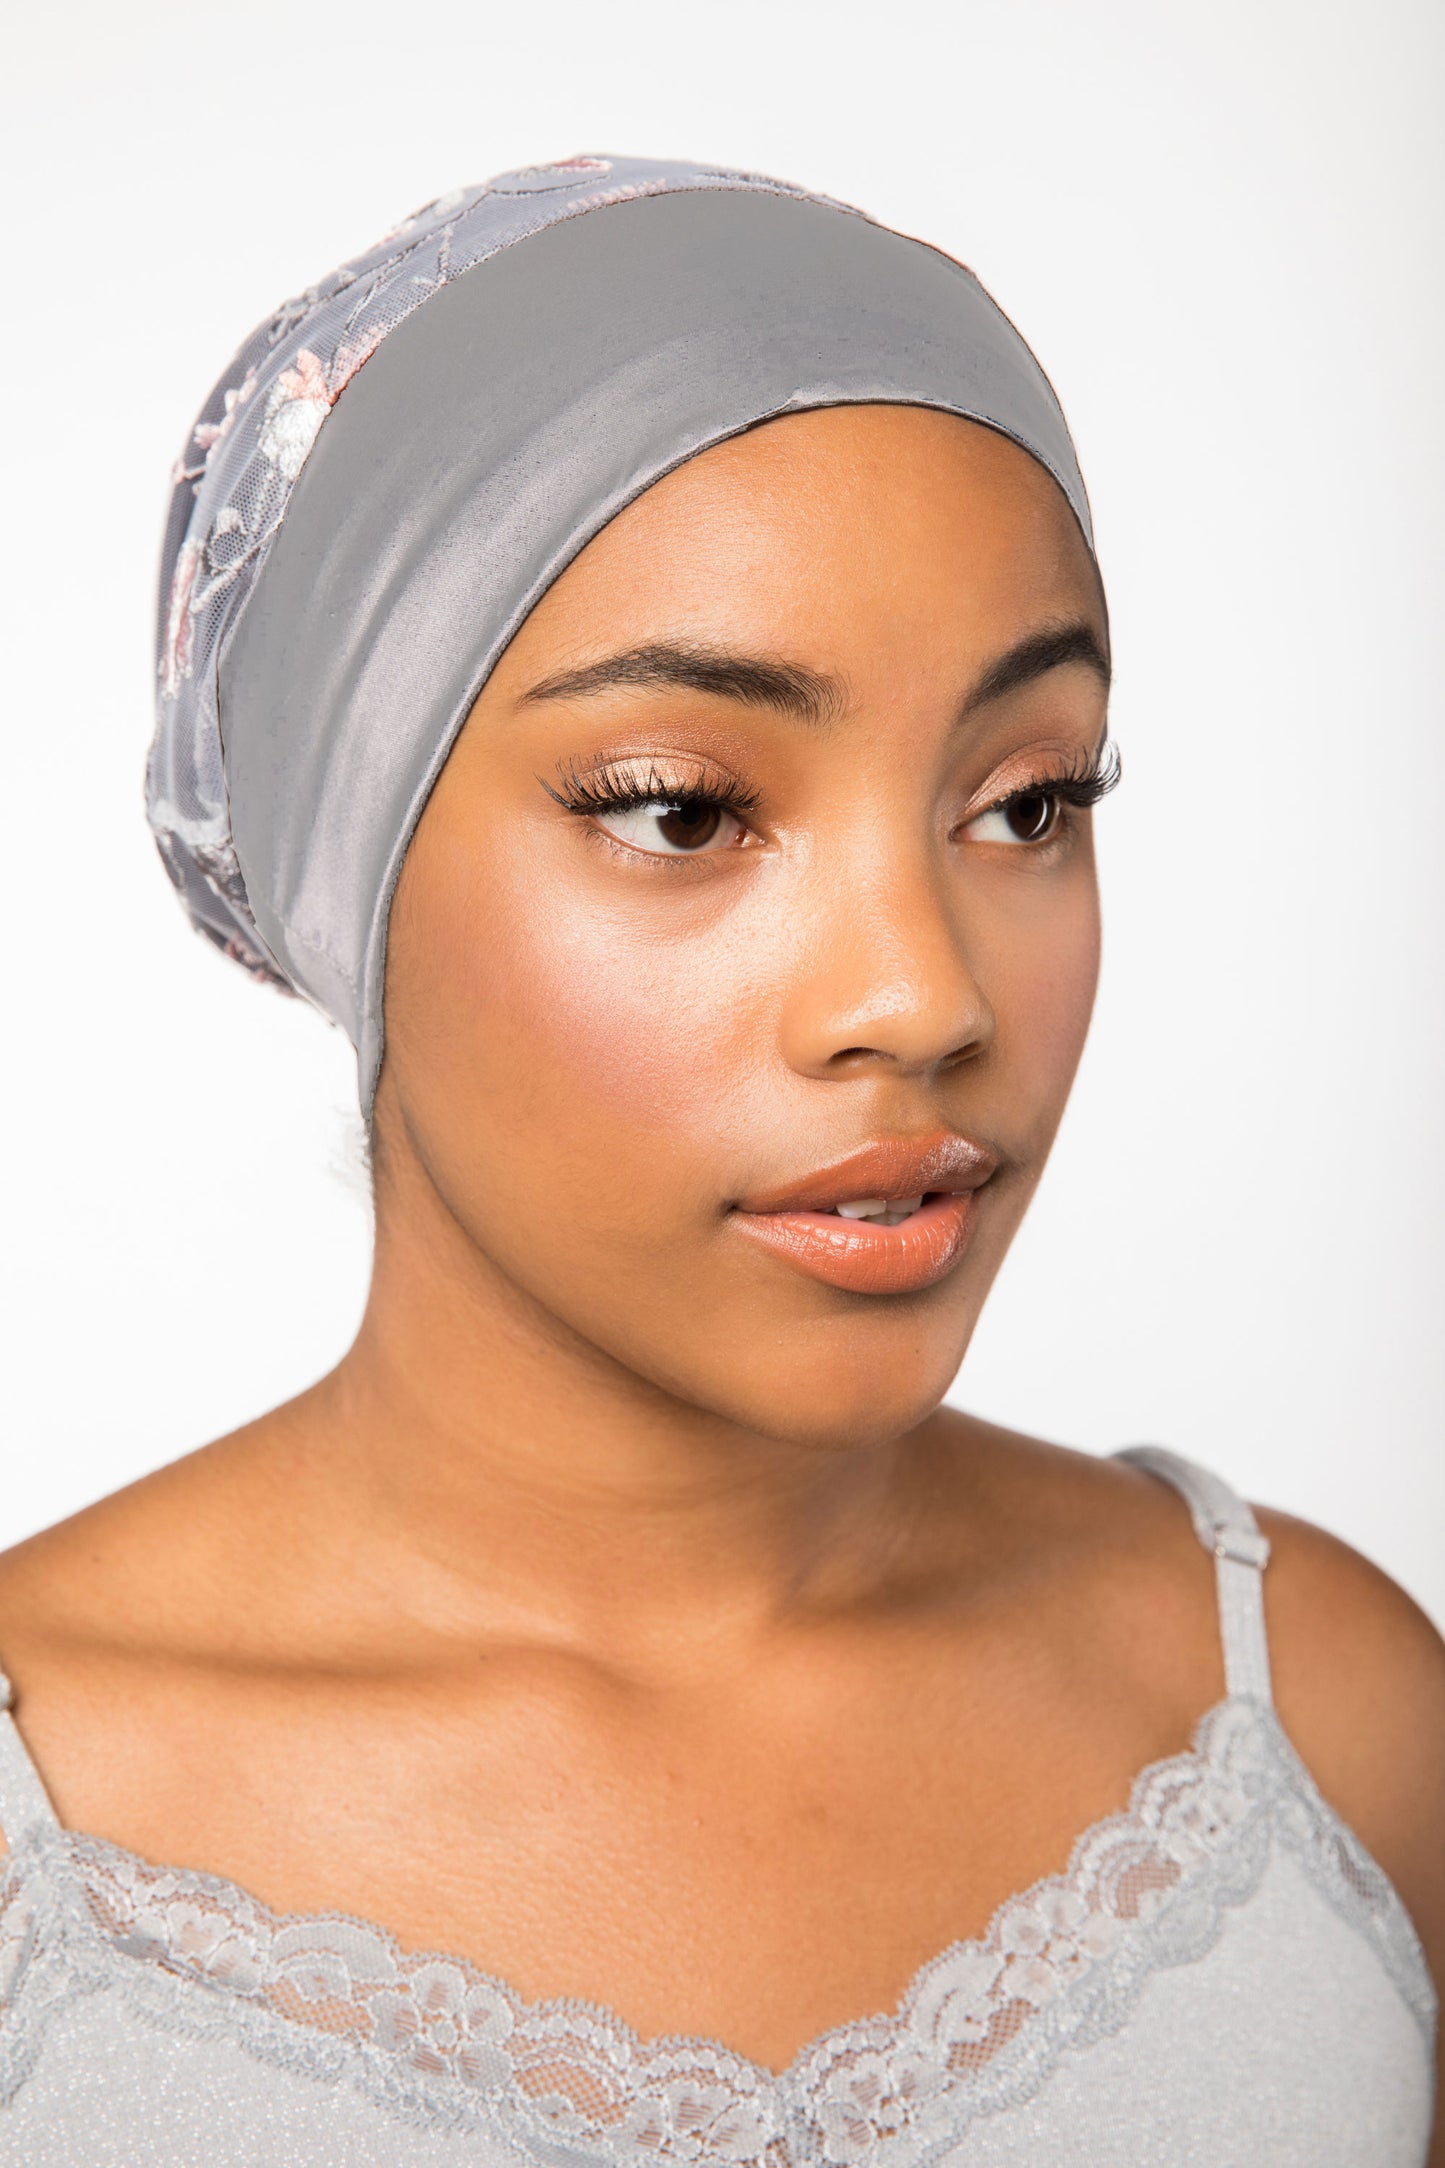 Embroidered Floral Mesh Satin-Lined Bonnet with a Silver Gray Band | Noelle